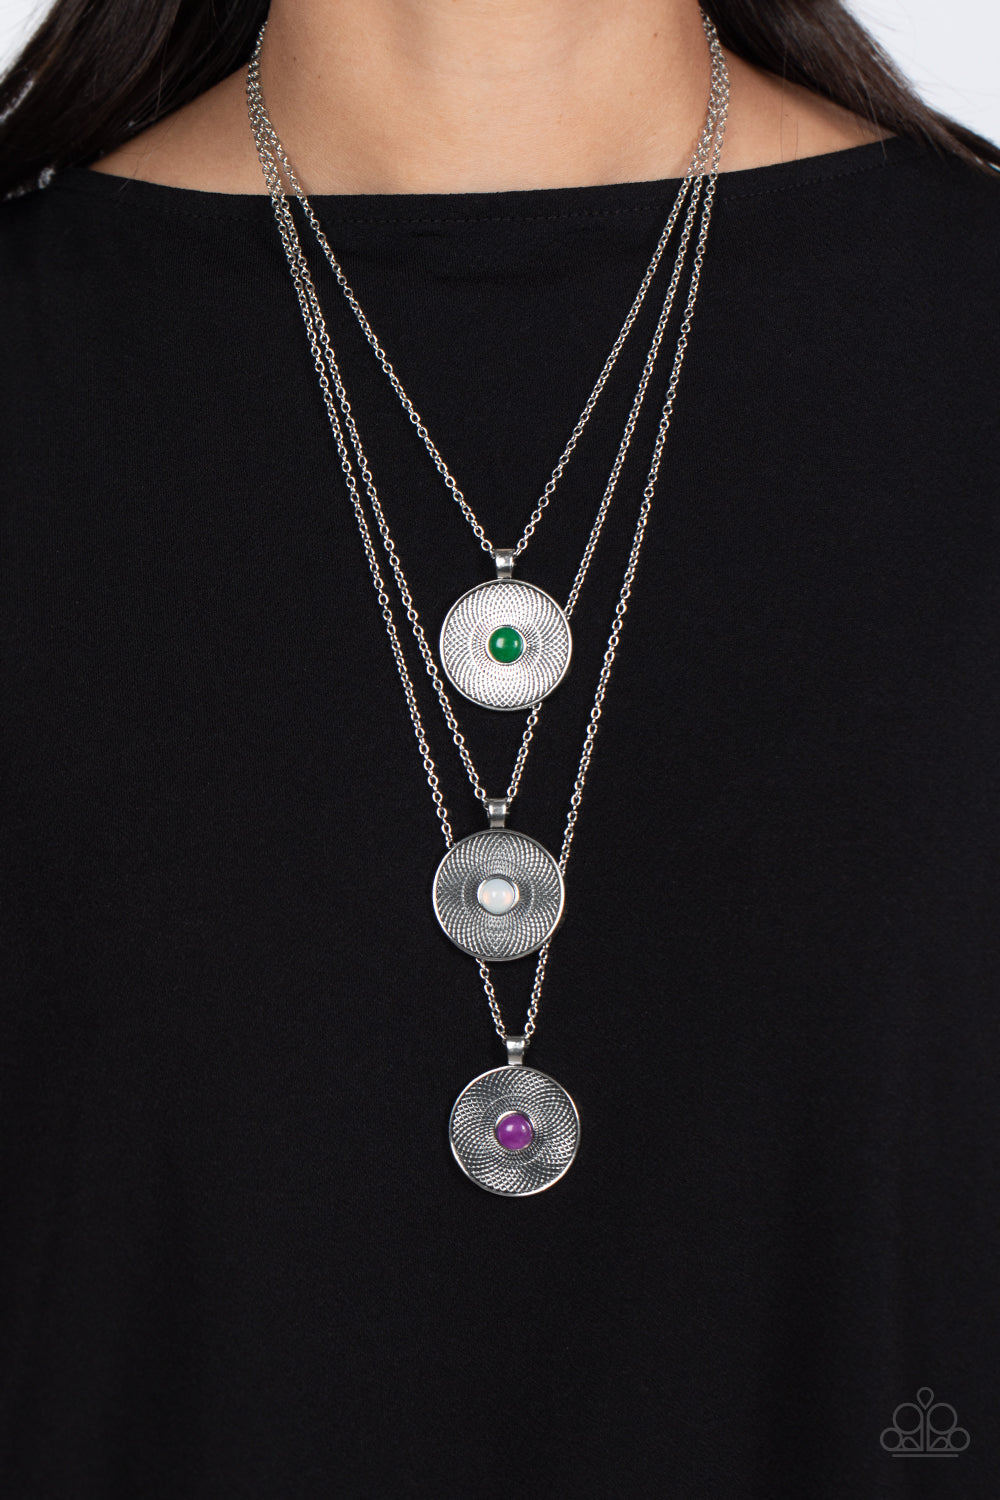 Geographic Grace - Purple, White and Jade Stone Medallion Silver Medium-Length Necklace